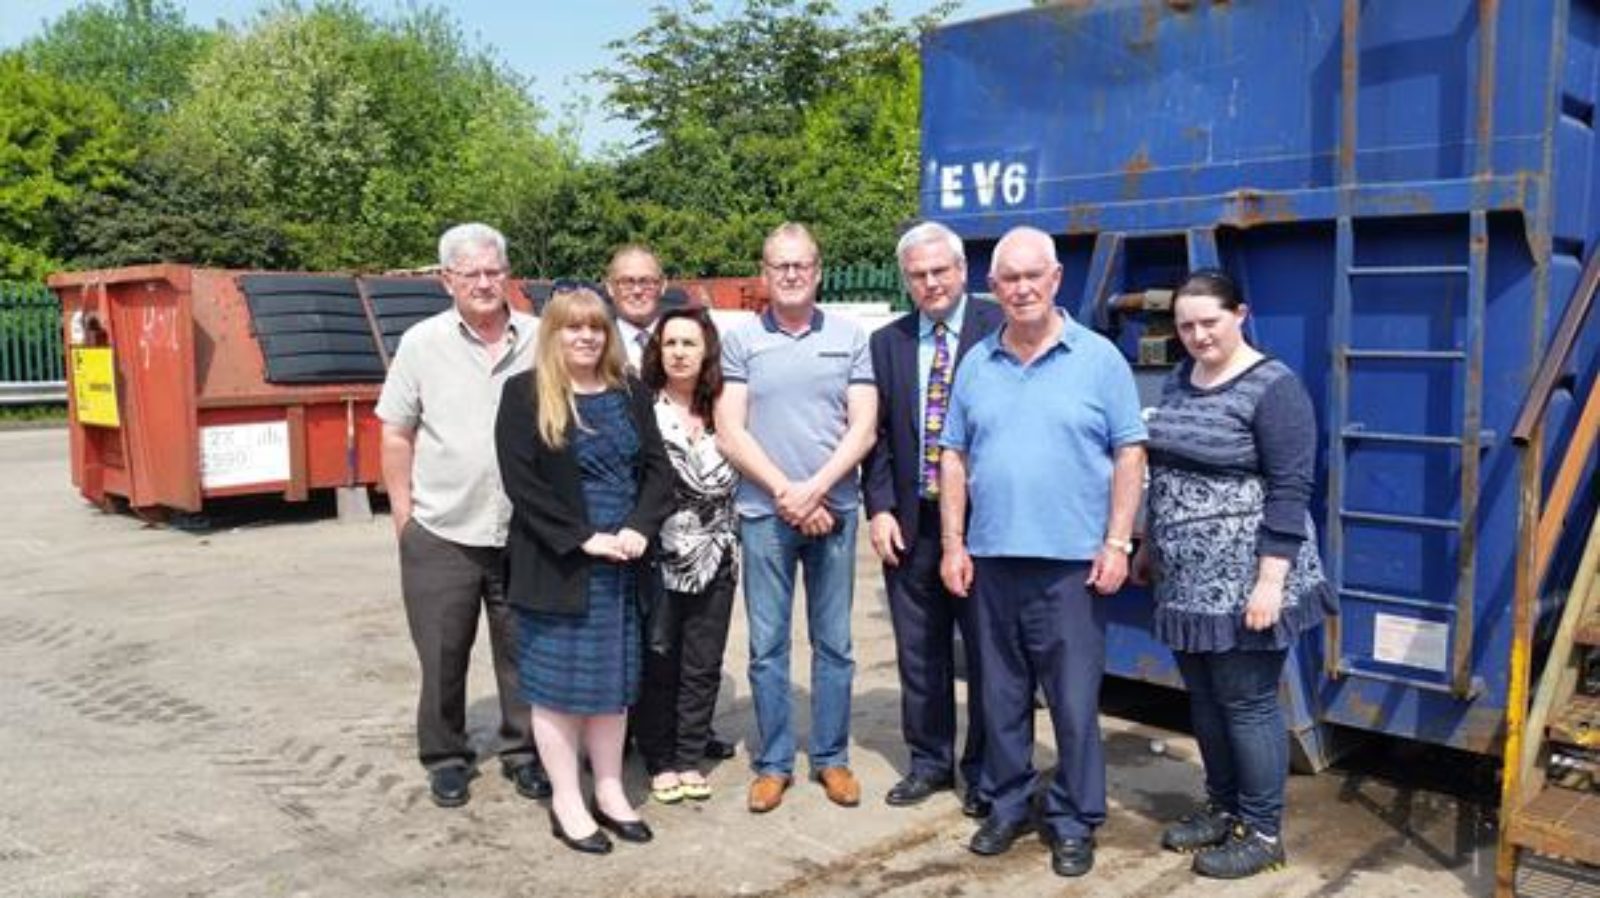 Labour Party Members at Buckley Recycling Centre - From left to right Mr Ken Preece, , Cllr Carolyn Preece, Cllr Iain Thomas, Mrs Vivienne Blondek, Buckley Town Mayor Andy Williams, Mark Tami MP, County Councillor Ron Hampson. Cllr Emma Preece